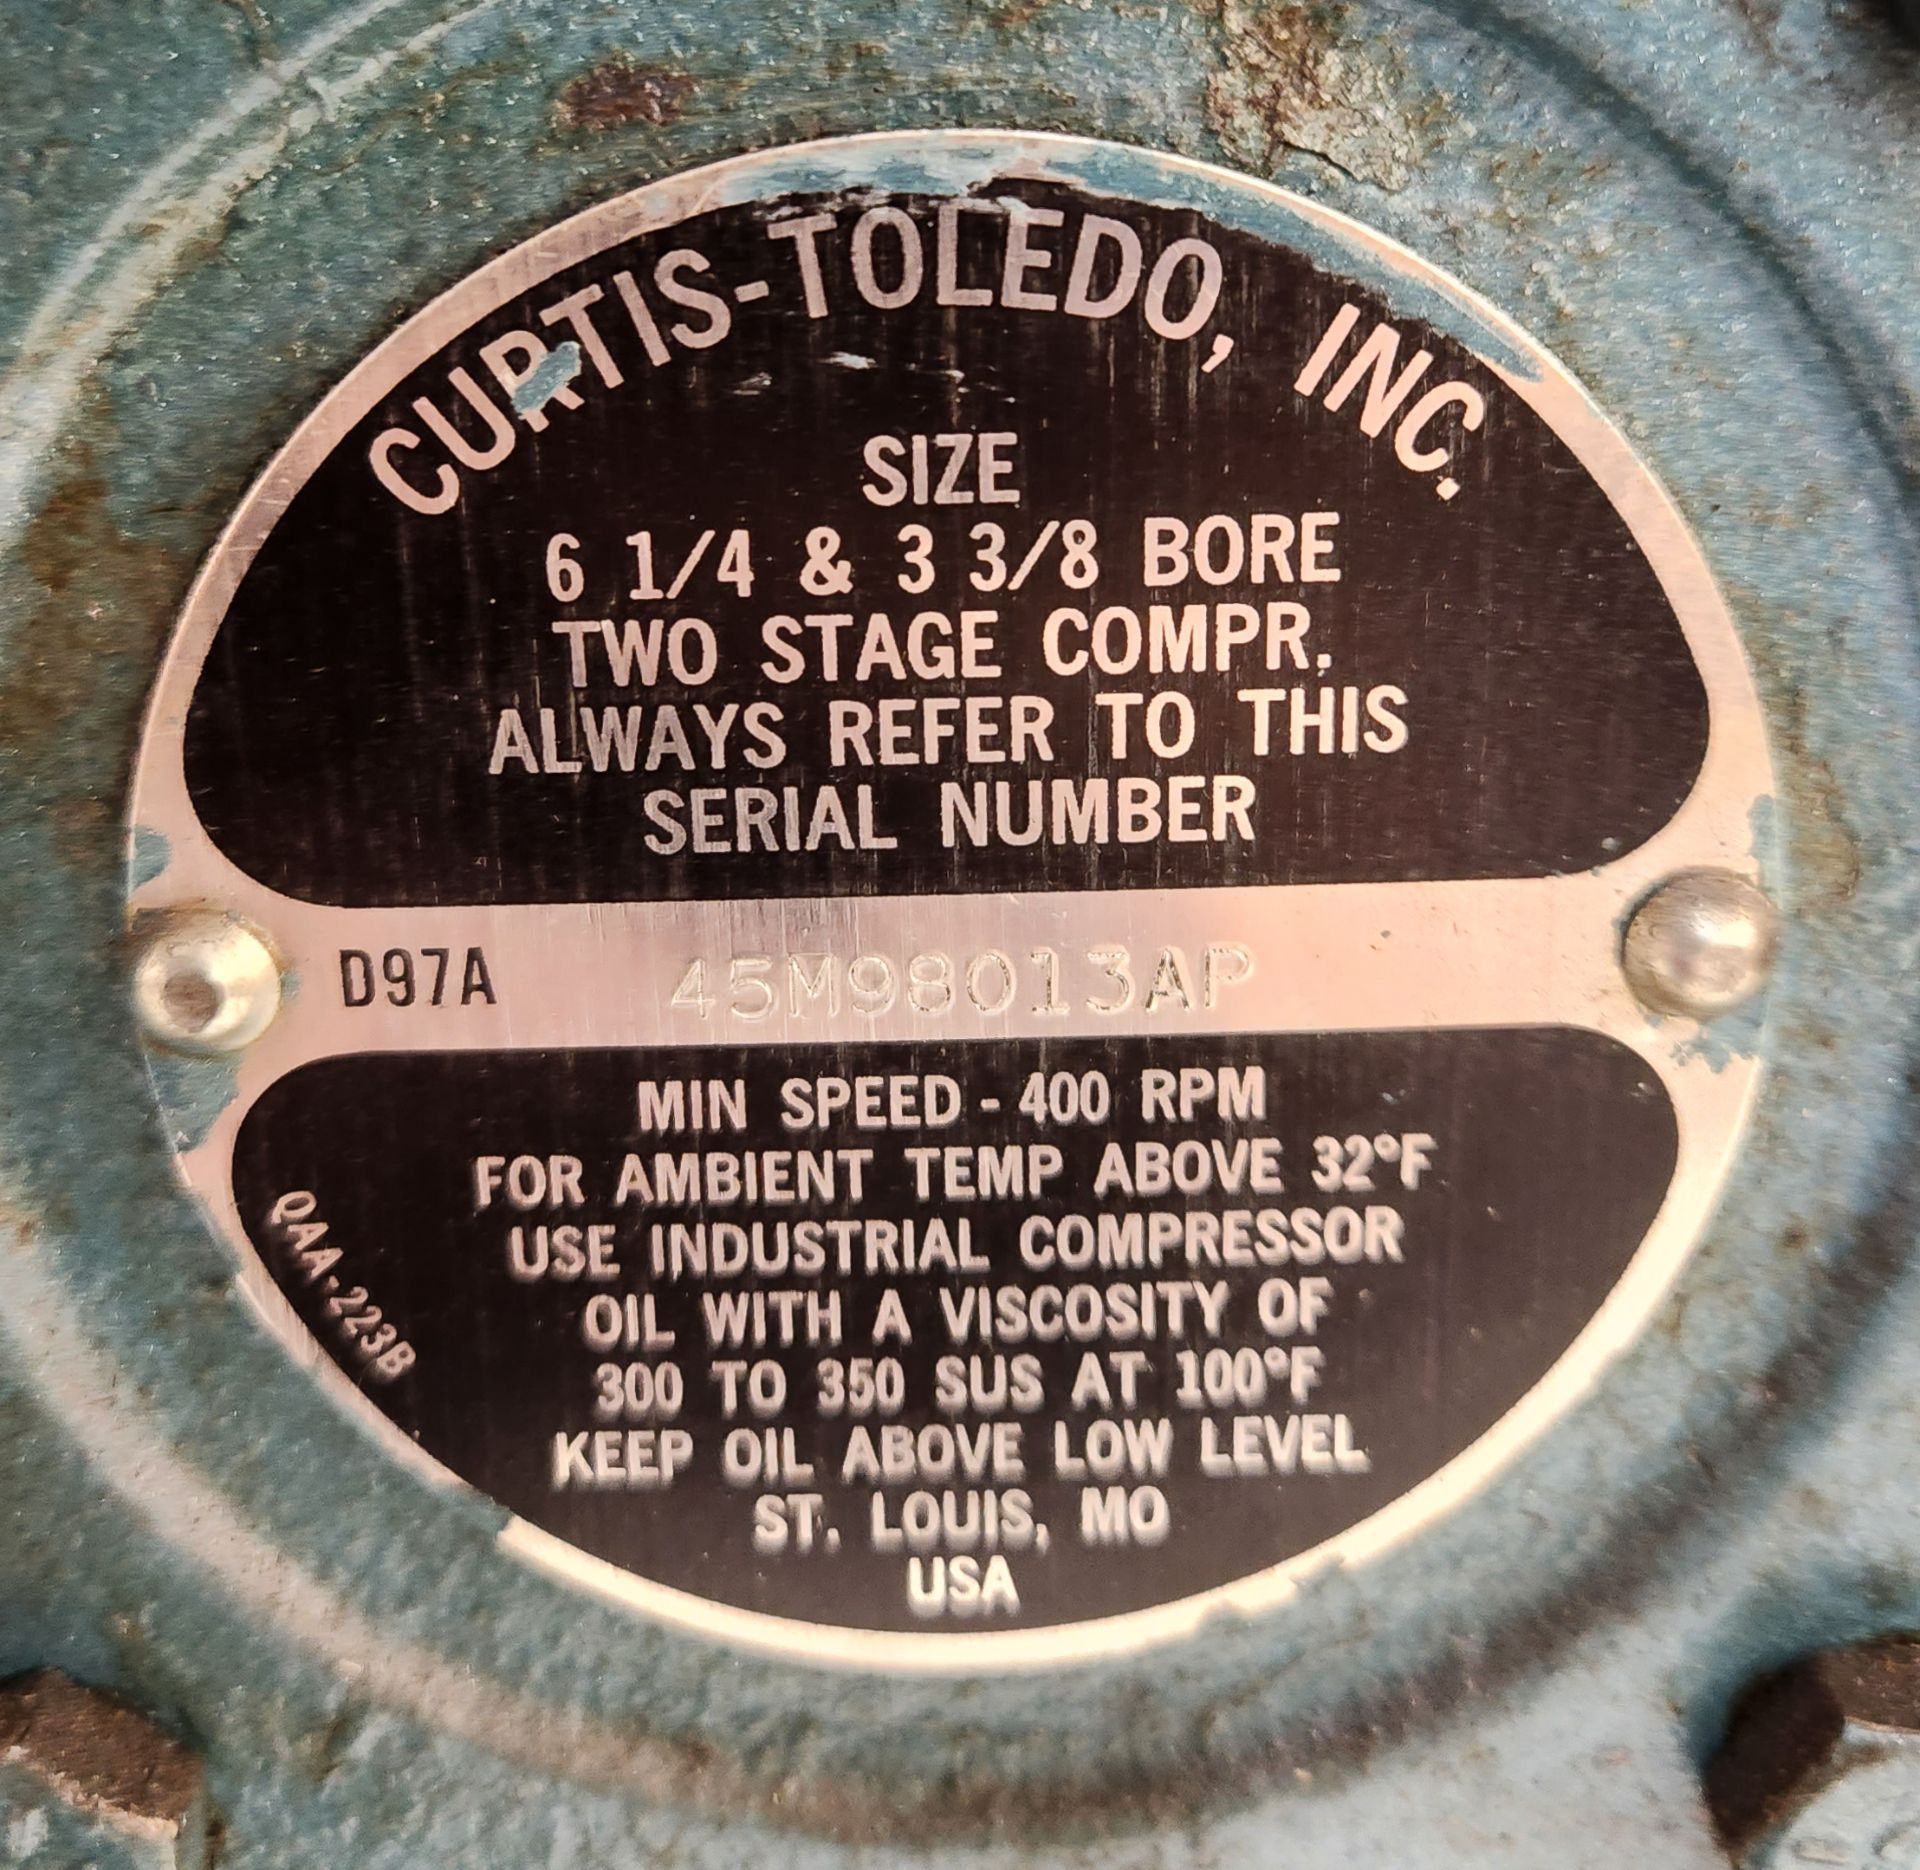 Curtis Toledo 120GAL Two Stage Compressor - Image 5 of 5